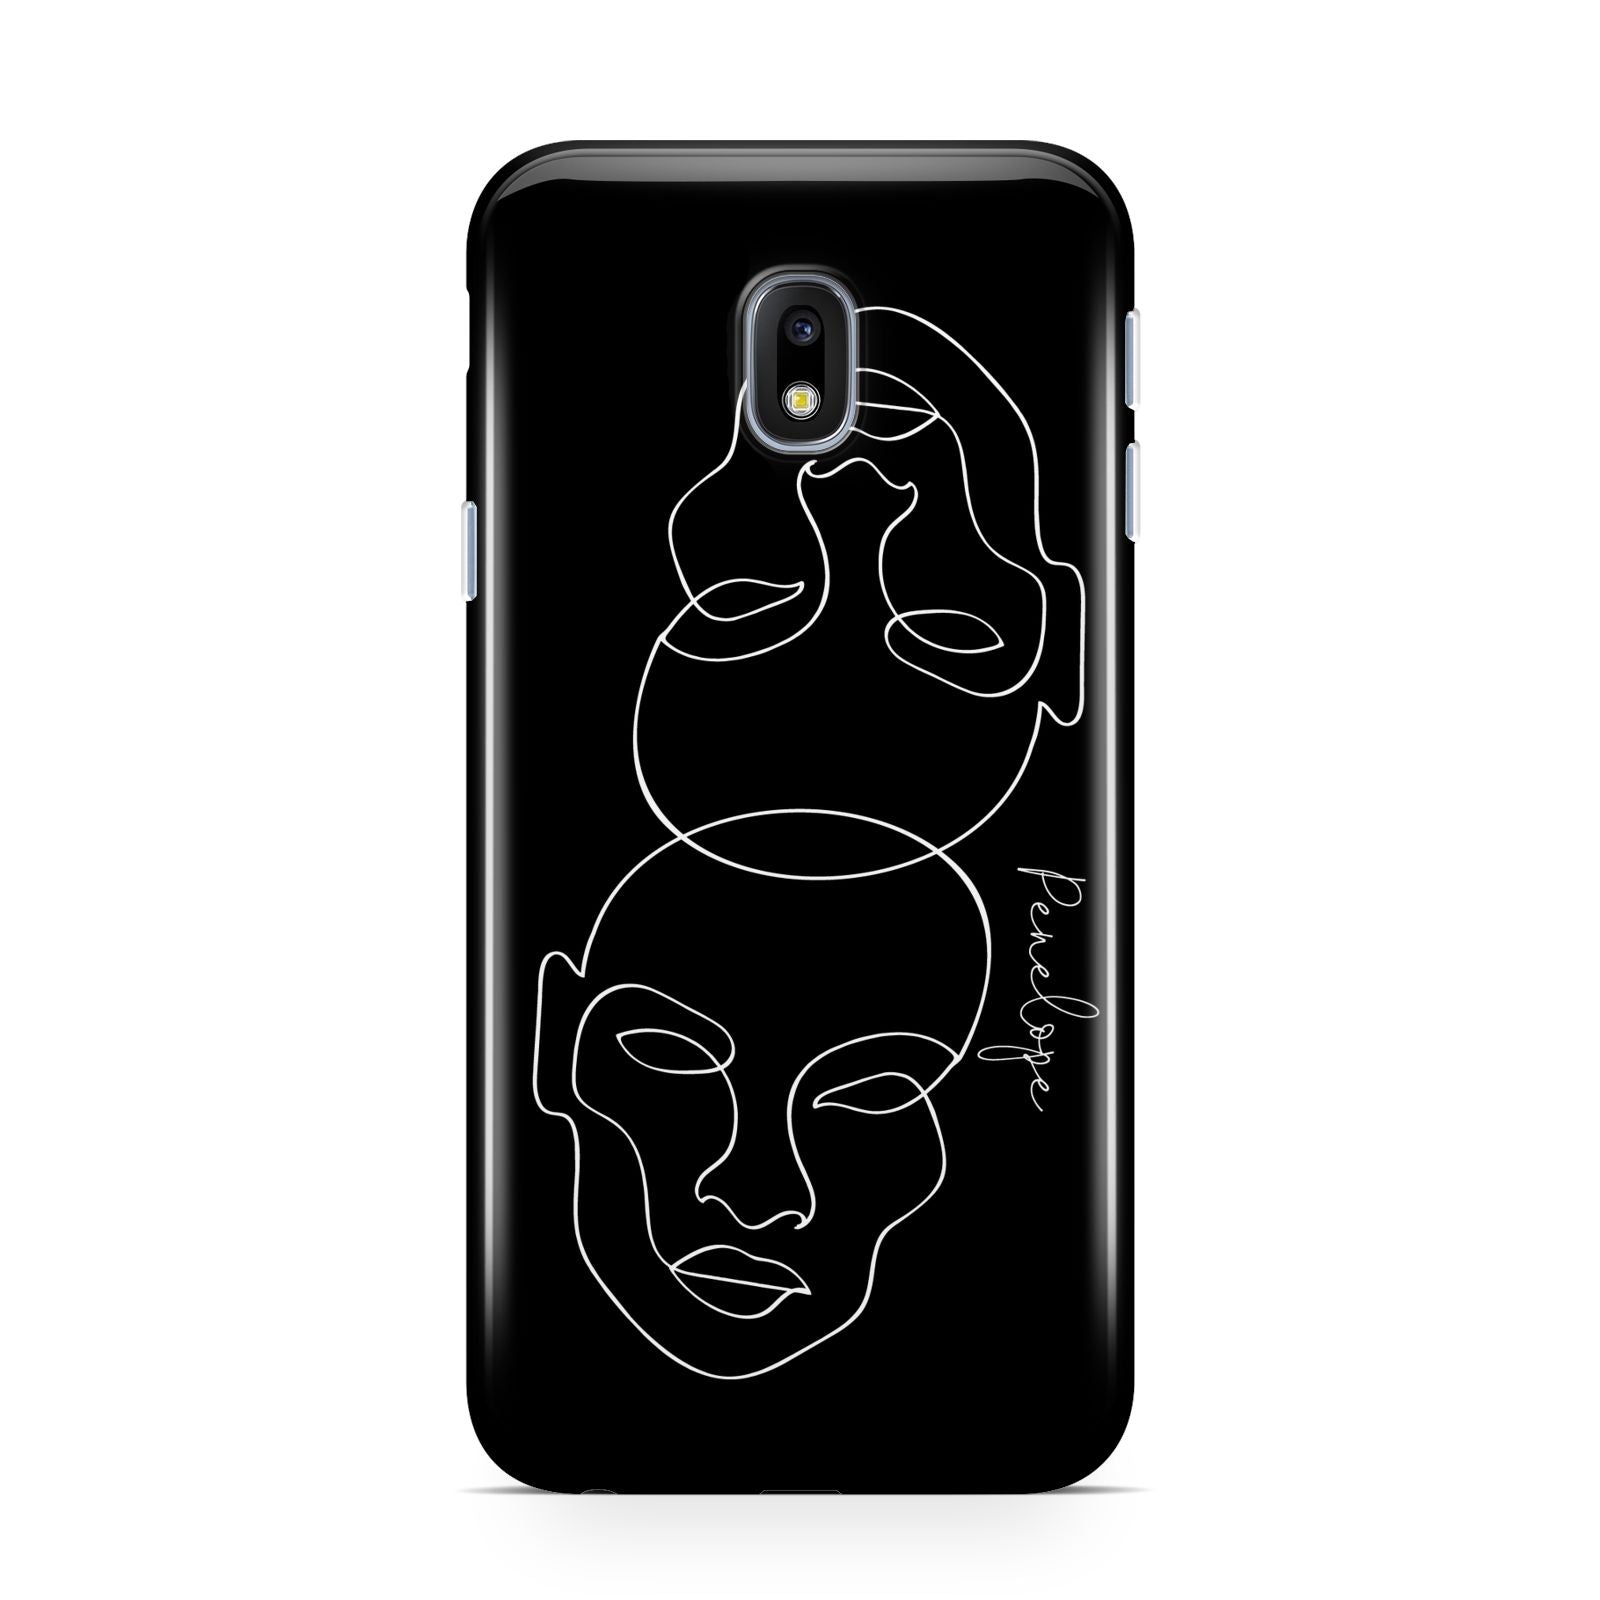 Personalised Abstract Line Art Samsung Galaxy J3 2017 Case